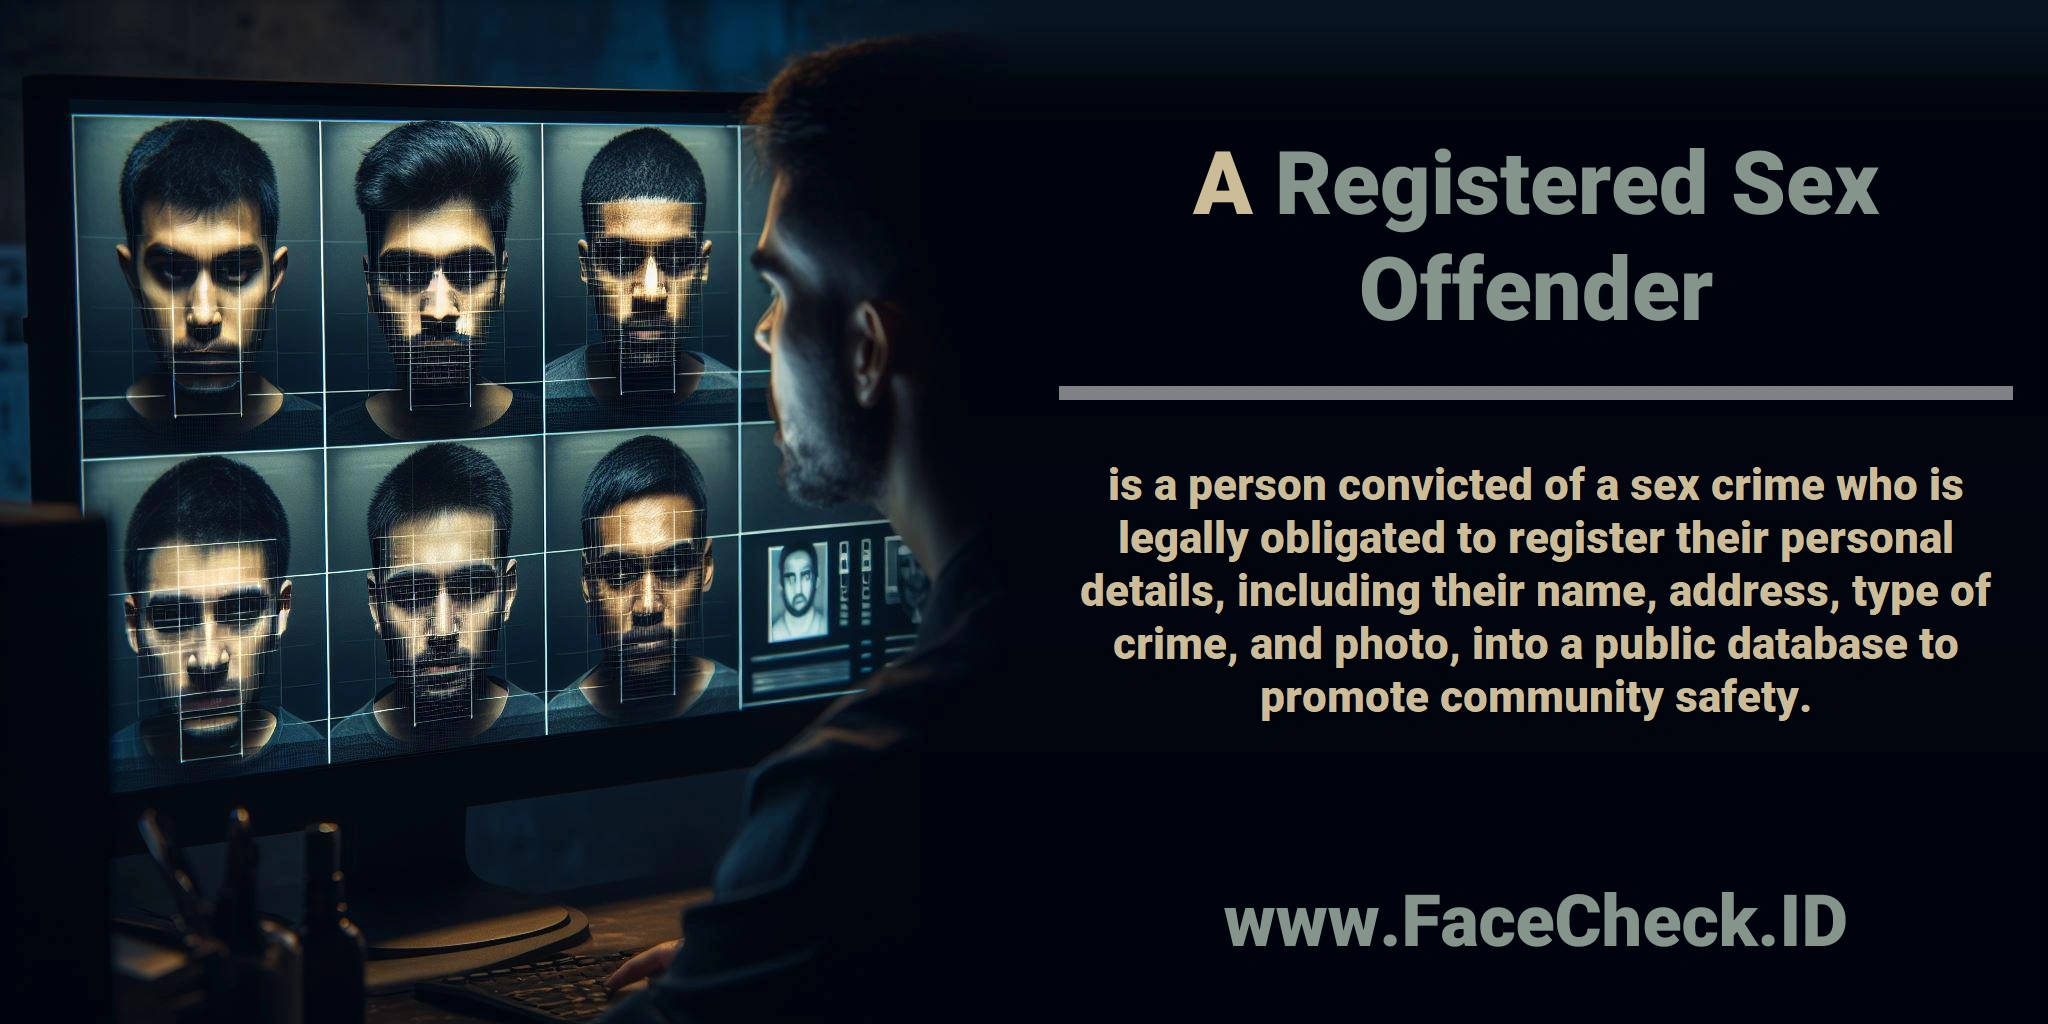 A <b>Registered Sex Offender</b> is a person convicted of a sex crime who is legally obligated to register their personal details, including their name, address, type of crime, and photo, into a public database to promote community safety.